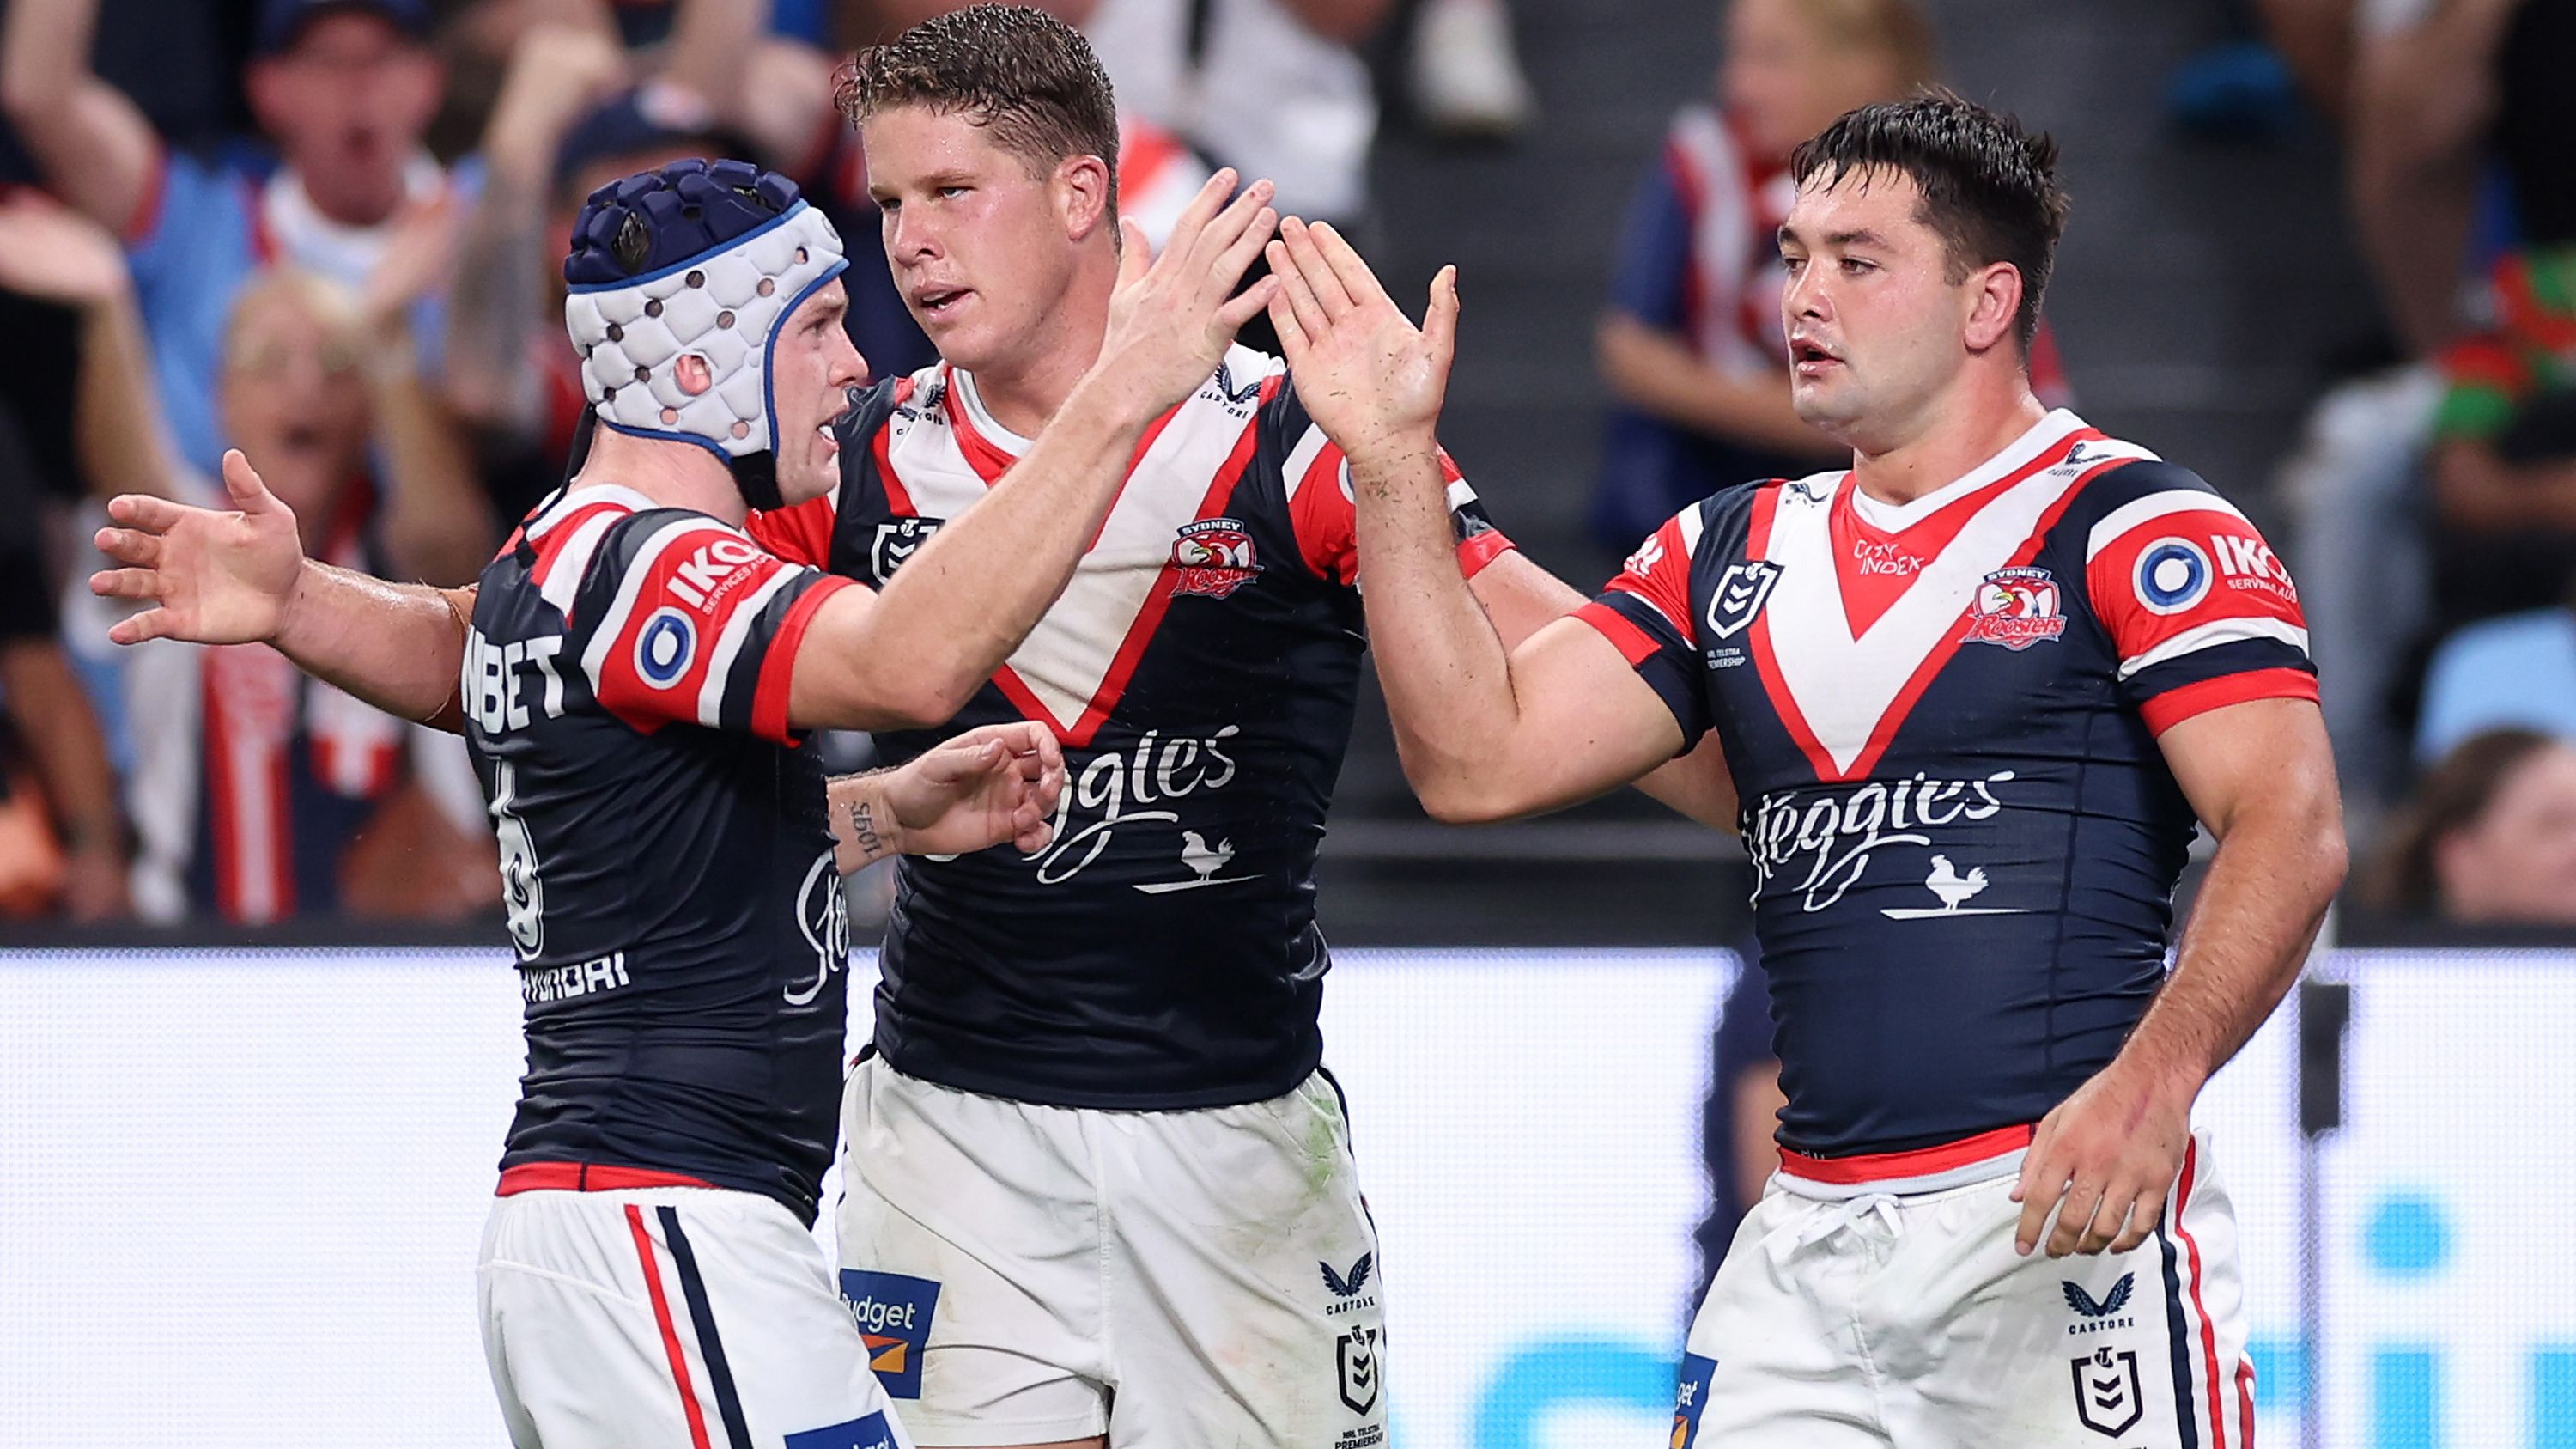 SYDNEY, AUSTRALIA - MARCH 17:  Brandon Smith of the Roosters celebrates with team mates after scoring a try during the round three NRL match between Sydney Roosters and South Sydney Rabbitohs at Allianz Stadium on March 17, 2023 in Sydney, Australia. (Photo by Mark Kolbe/Getty Images)